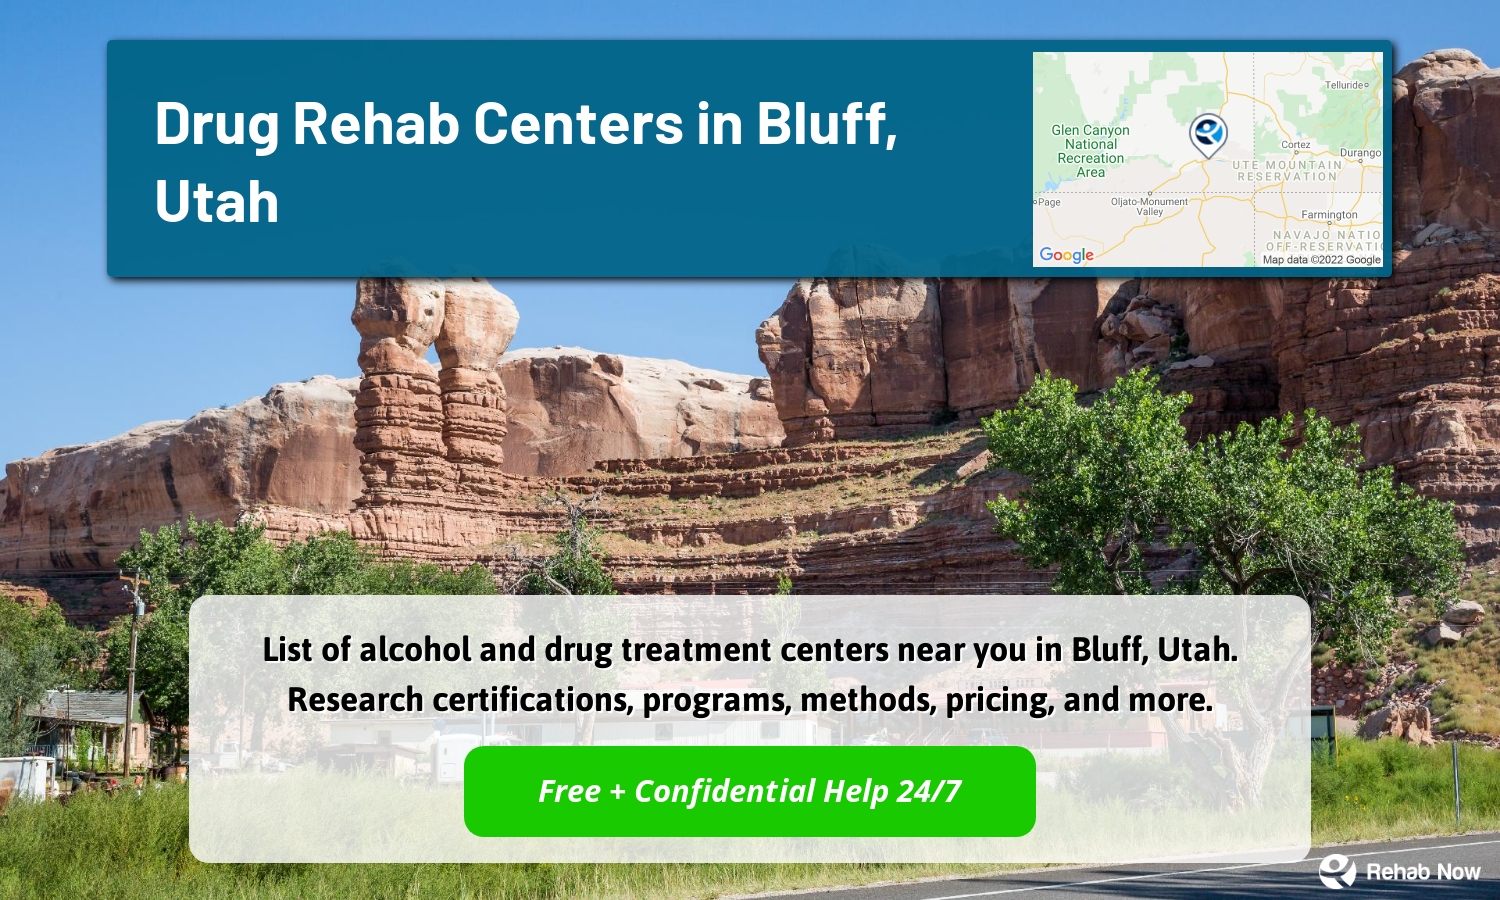 List of alcohol and drug treatment centers near you in Bluff, Utah. Research certifications, programs, methods, pricing, and more.